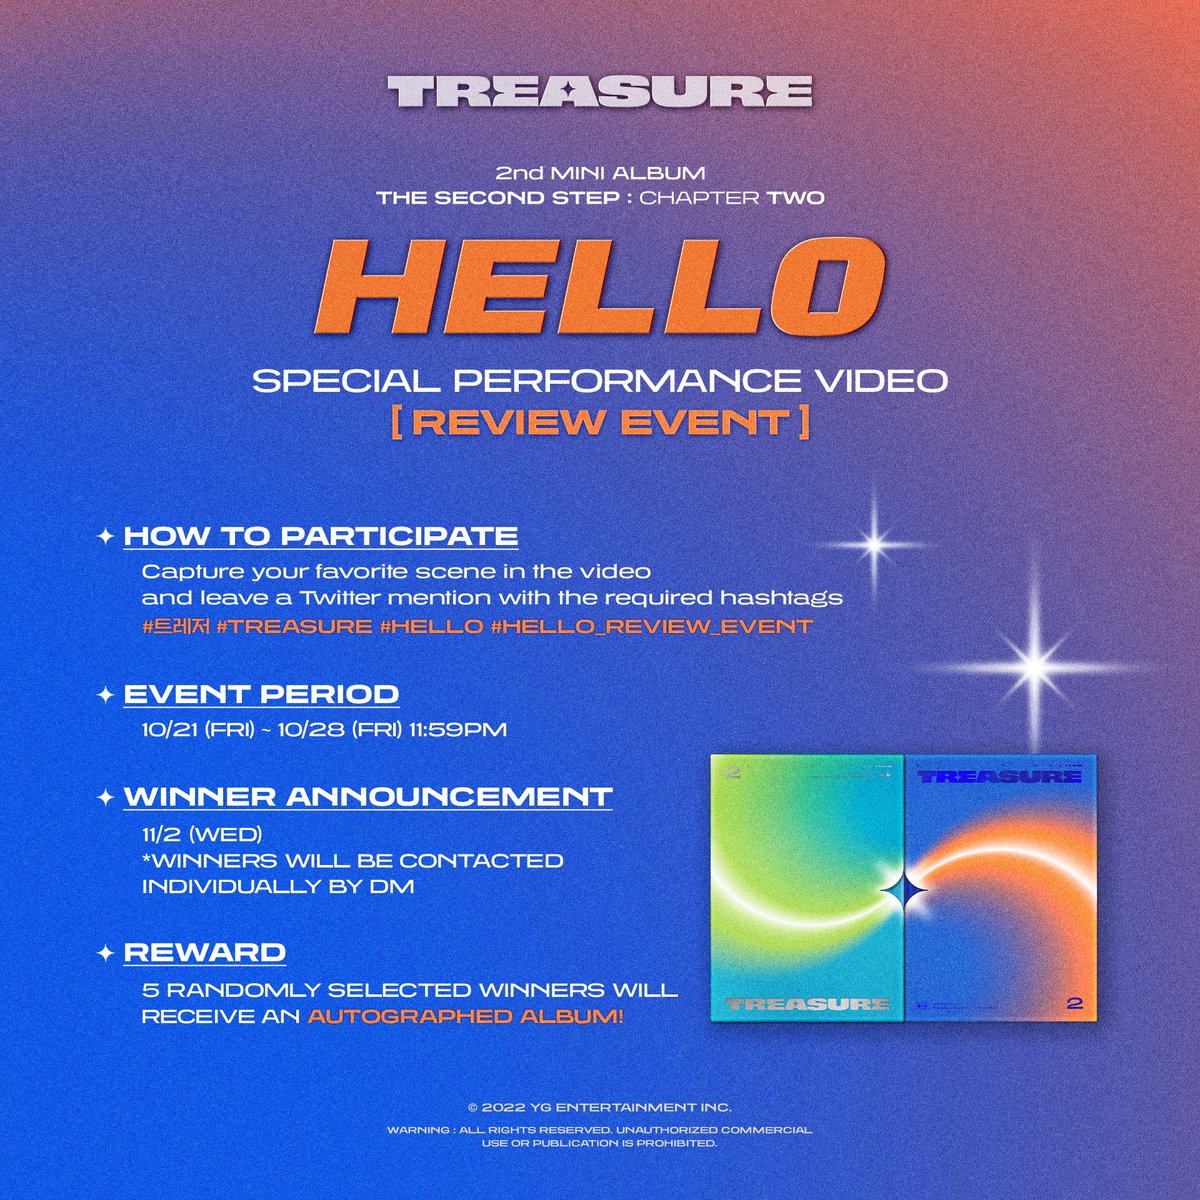 #TREASURE - ‘HELLO SPECIAL PERFORMANCE VIDEO’ REVIEW EVENT

▶️ VIDEO LINK
youtu.be/nDhIZIGz0xo

#트레저 #2ndMINIALBUM #THESECONDSTEP_CHAPTERTWO #HELLO #SPECIAL_PERFORMANCE_VIDEO #HELLO_REVIEW_EVENT #HELLOeverywhere #YG